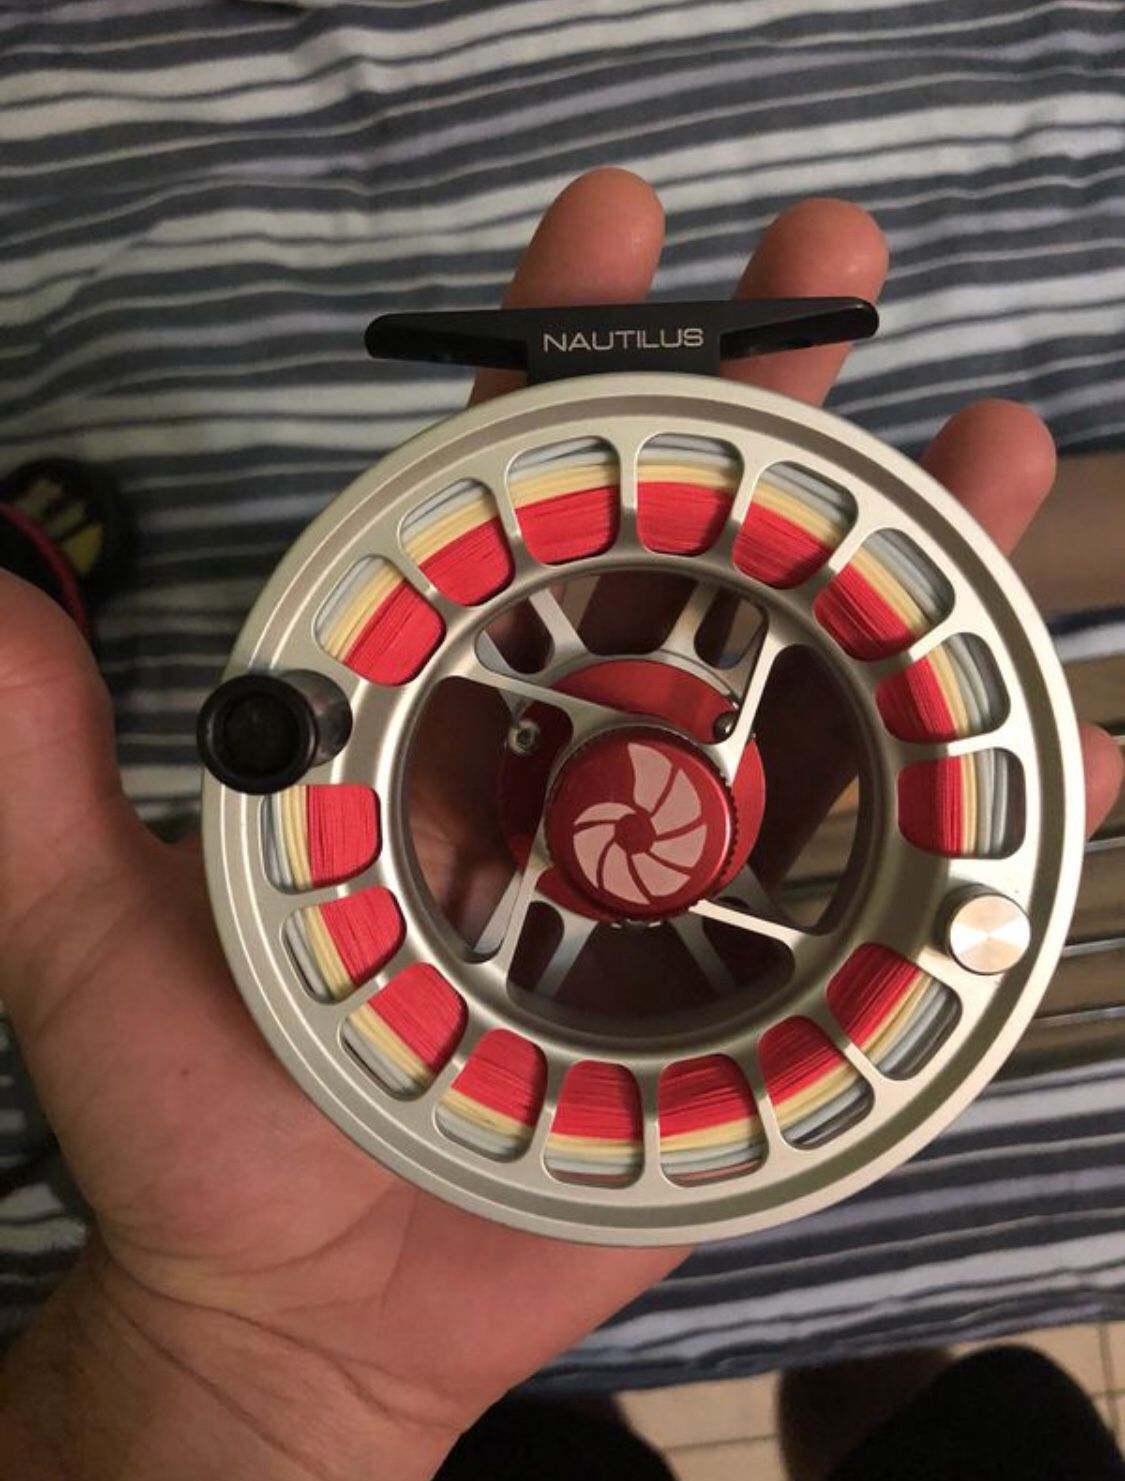 Nautilus Fly Reel and G.Loomis Fly rod for Sale in Coral Gables